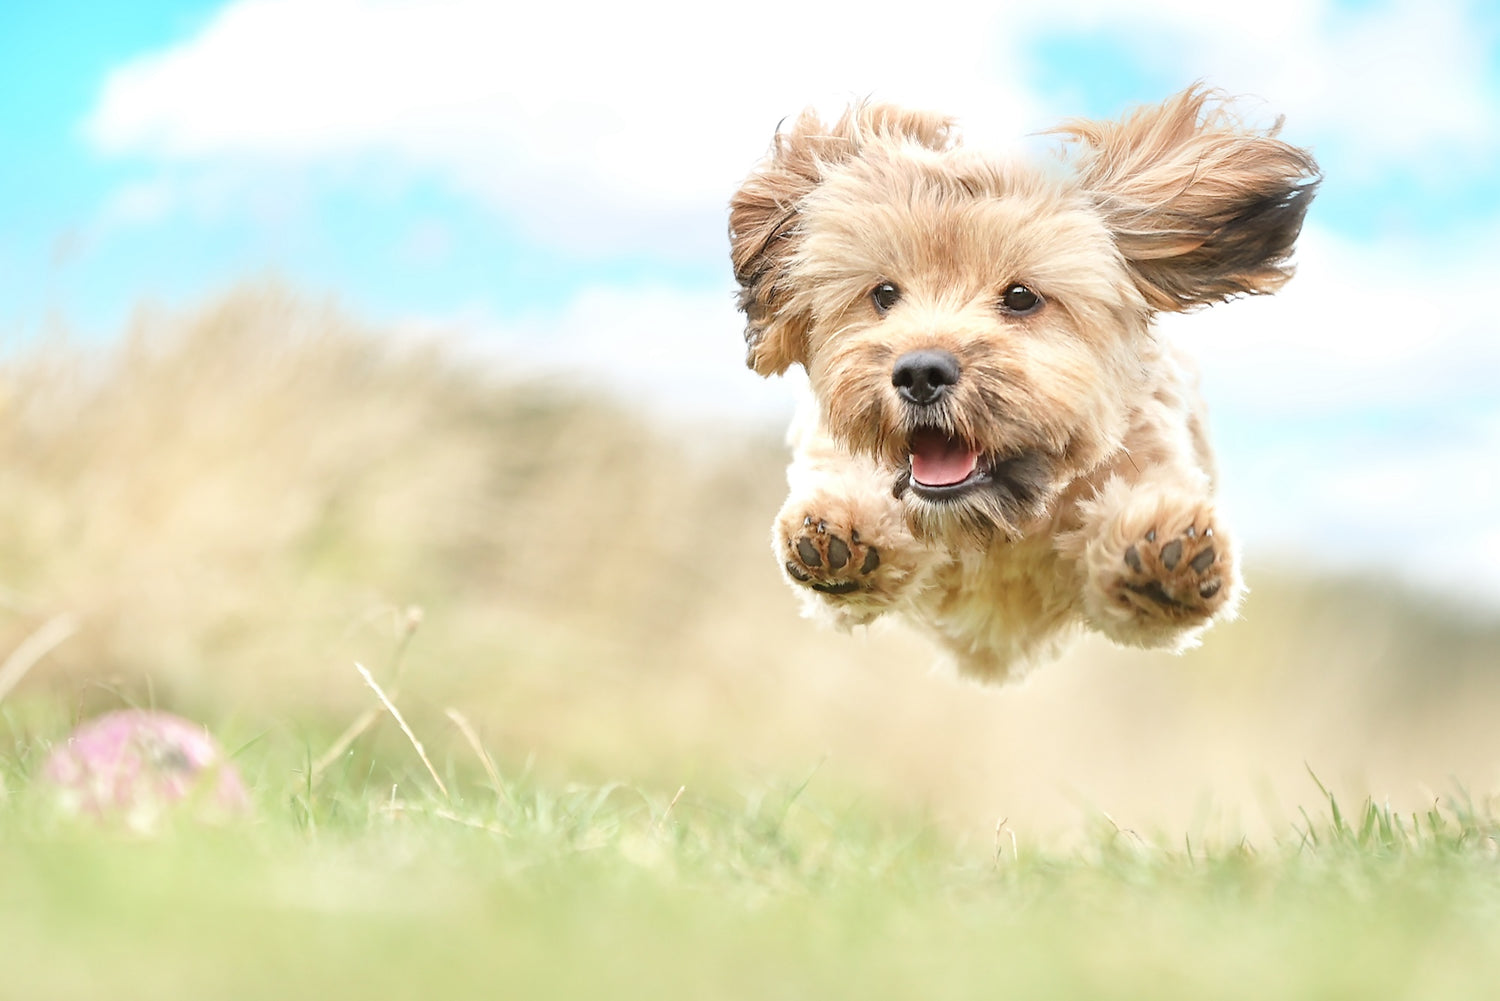 Small dog leaping